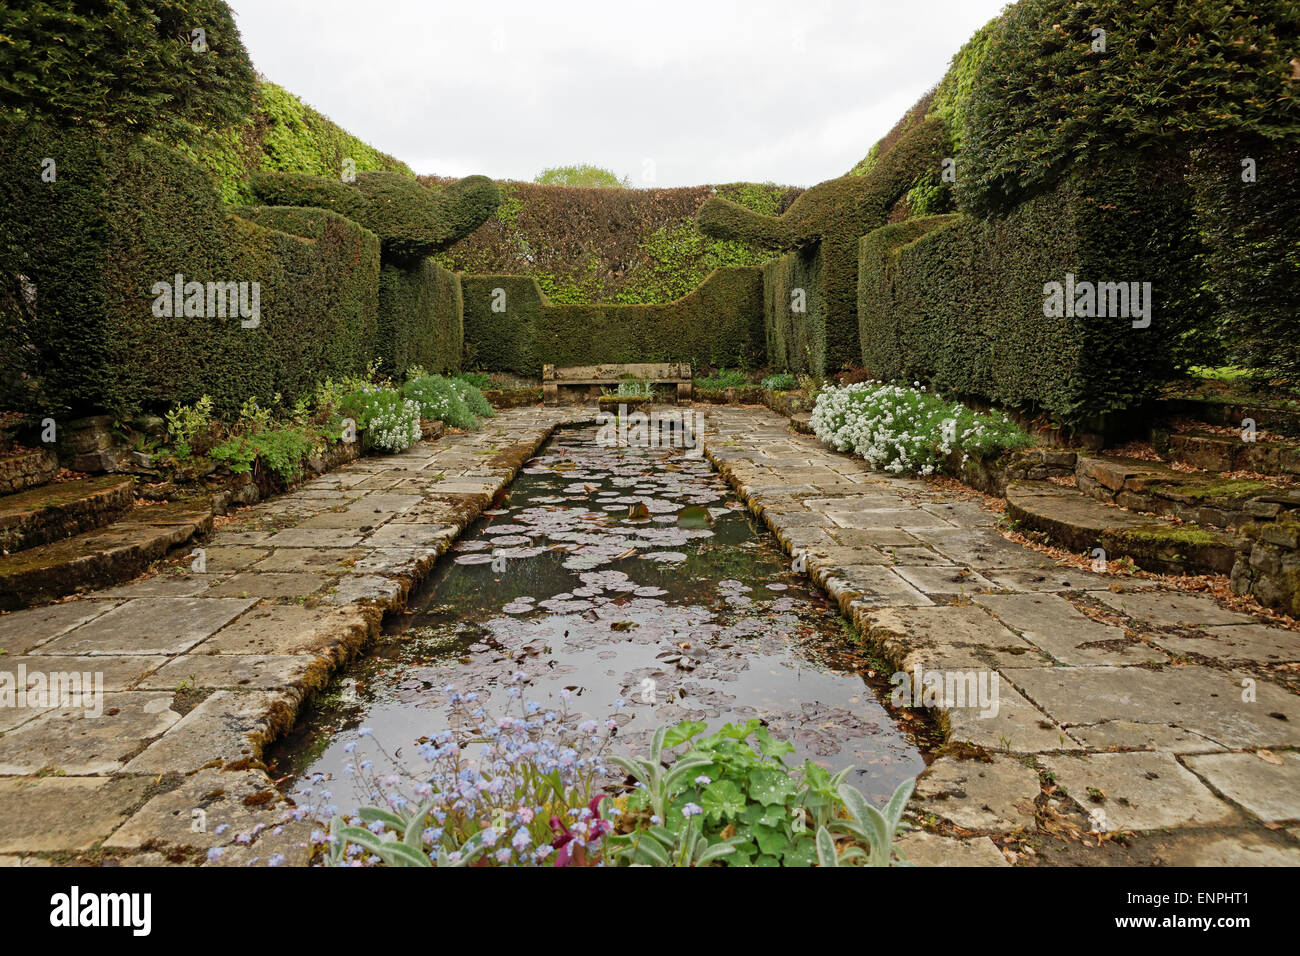 Pond surrounded by topiary and hedging. Stock Photo